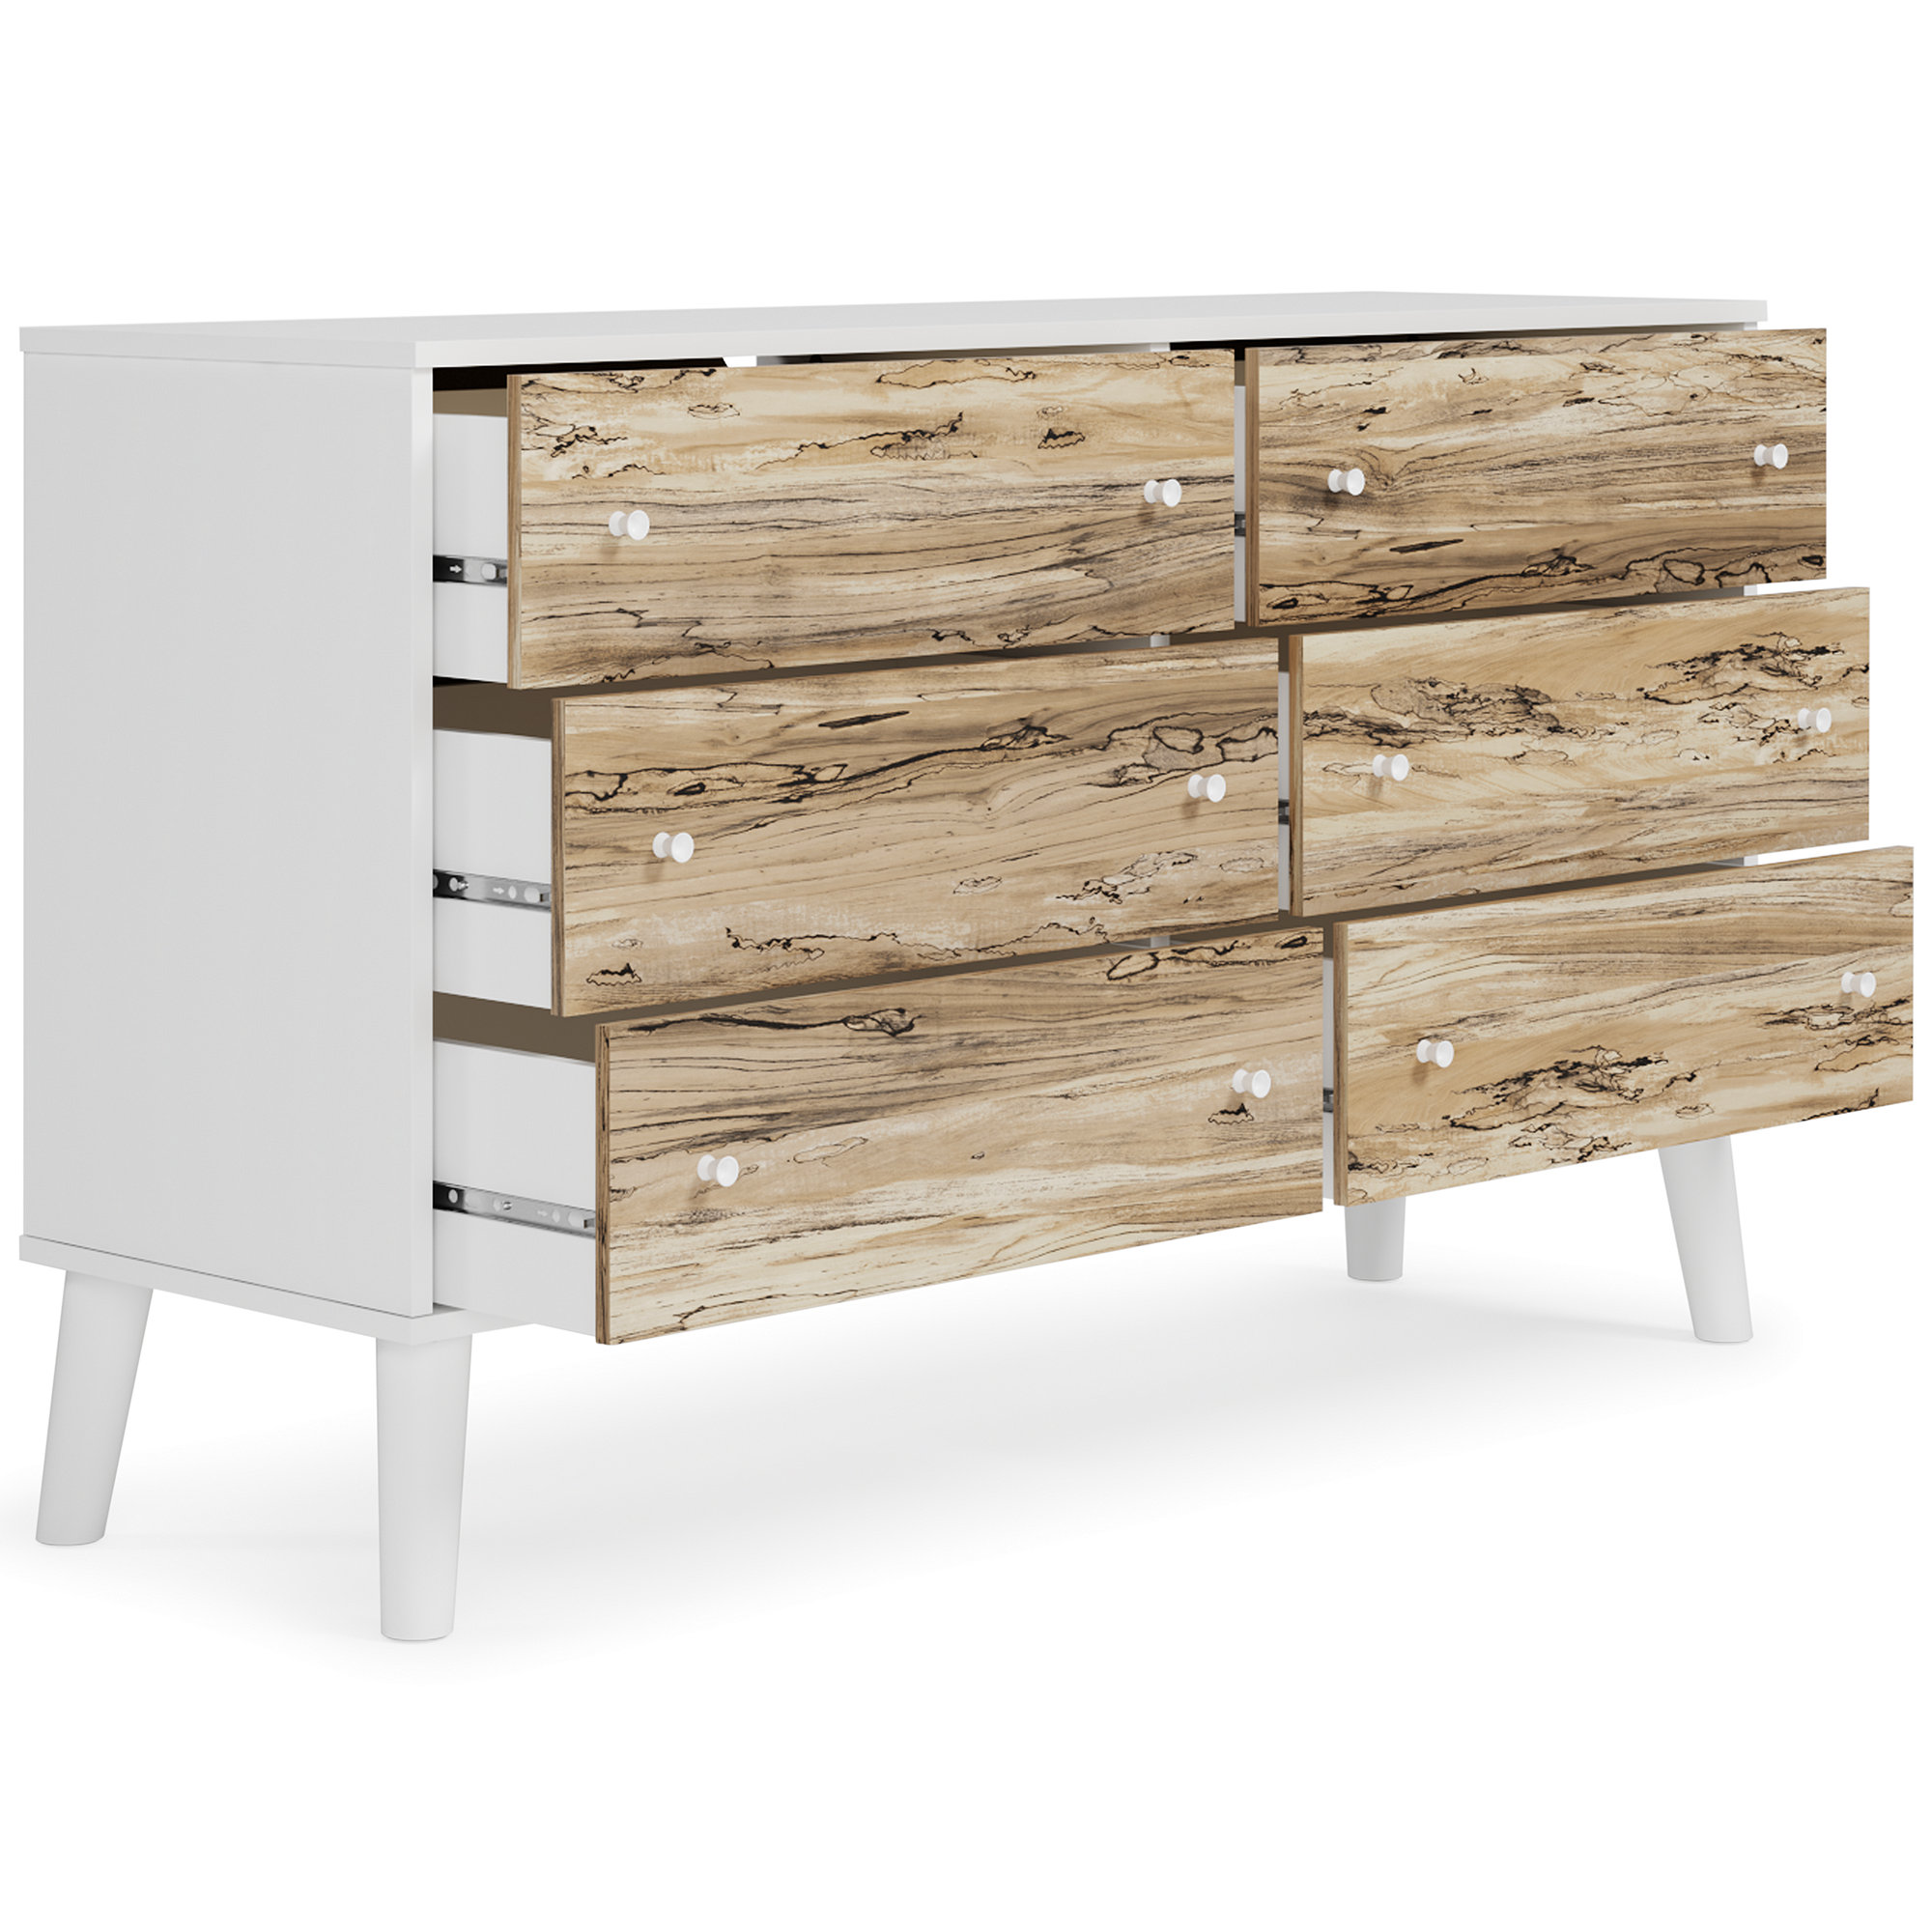 Signature Design by Ashley Contemporary Piperton 6 Drawer Dresser, Two-tone Brown/White - image 3 of 7